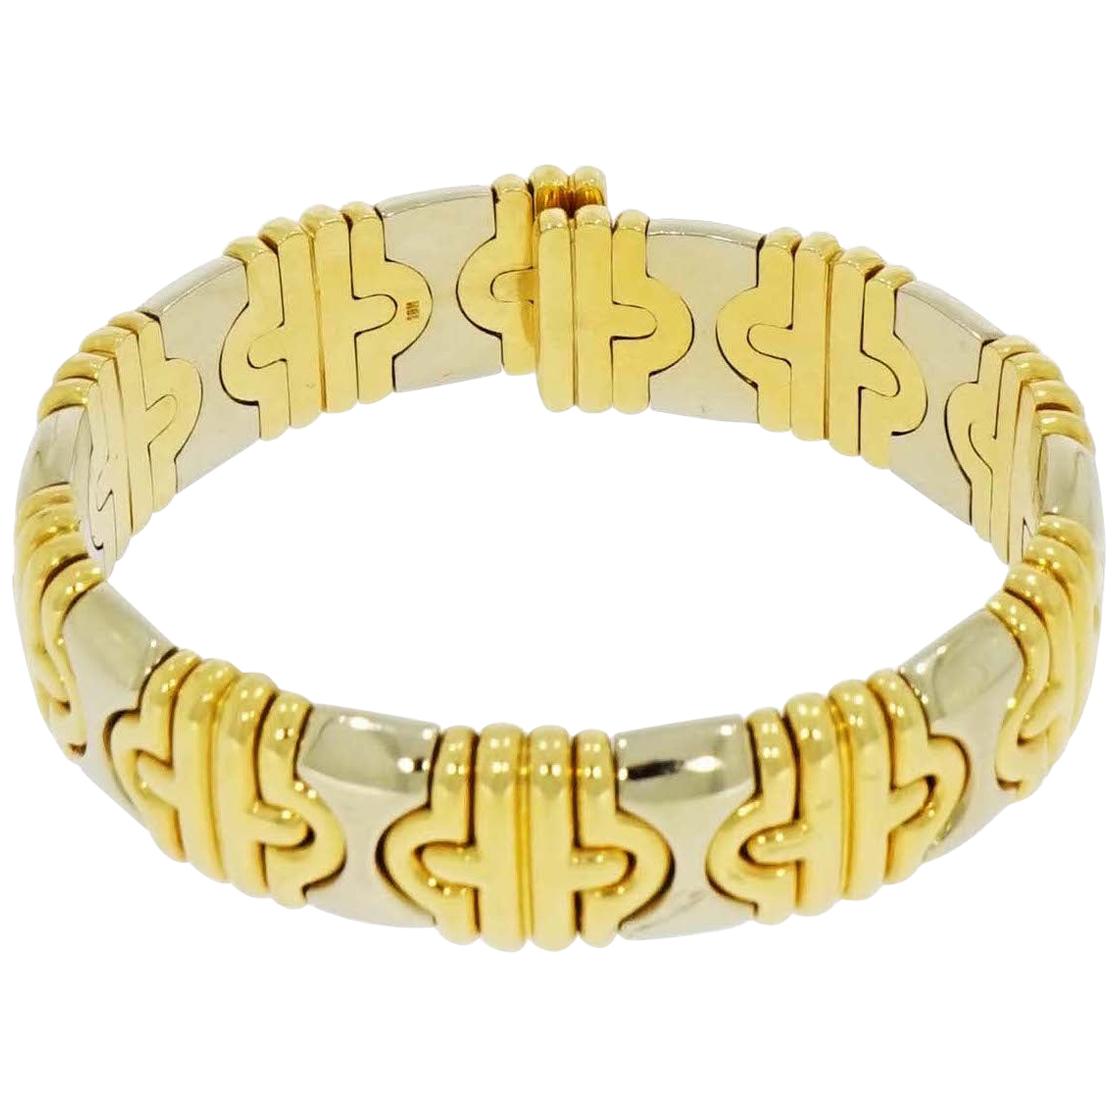 Yellow and White Gold Flexible Cuff Bracelet